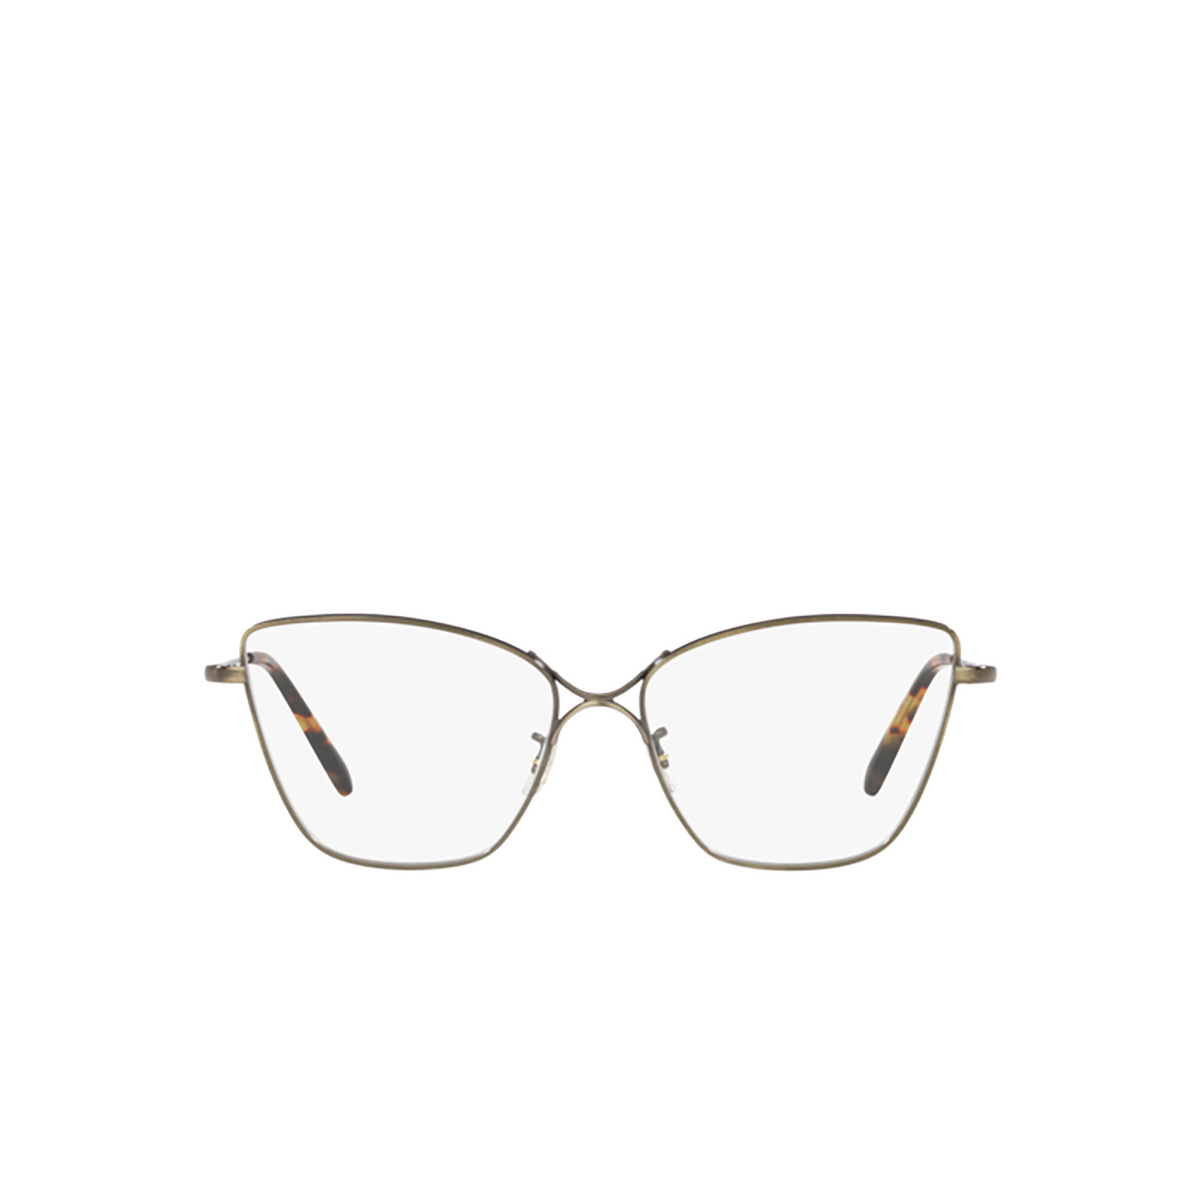 Occhiali da sole Oliver Peoples MARLYSE 5284SB Antique gold - frontale